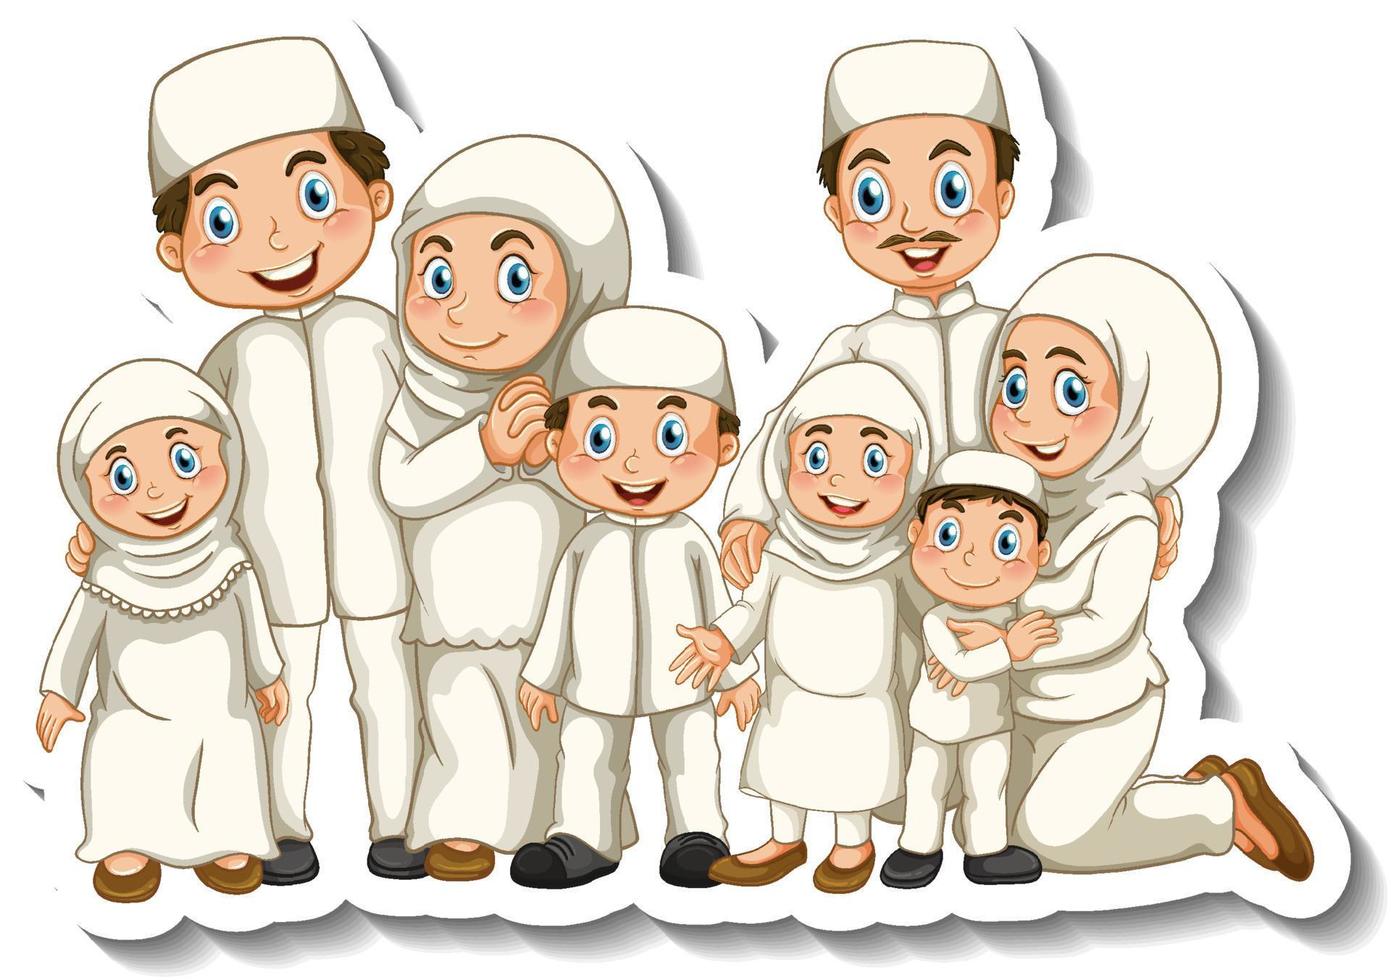 Sticker template with Muslim family cartoon character vector